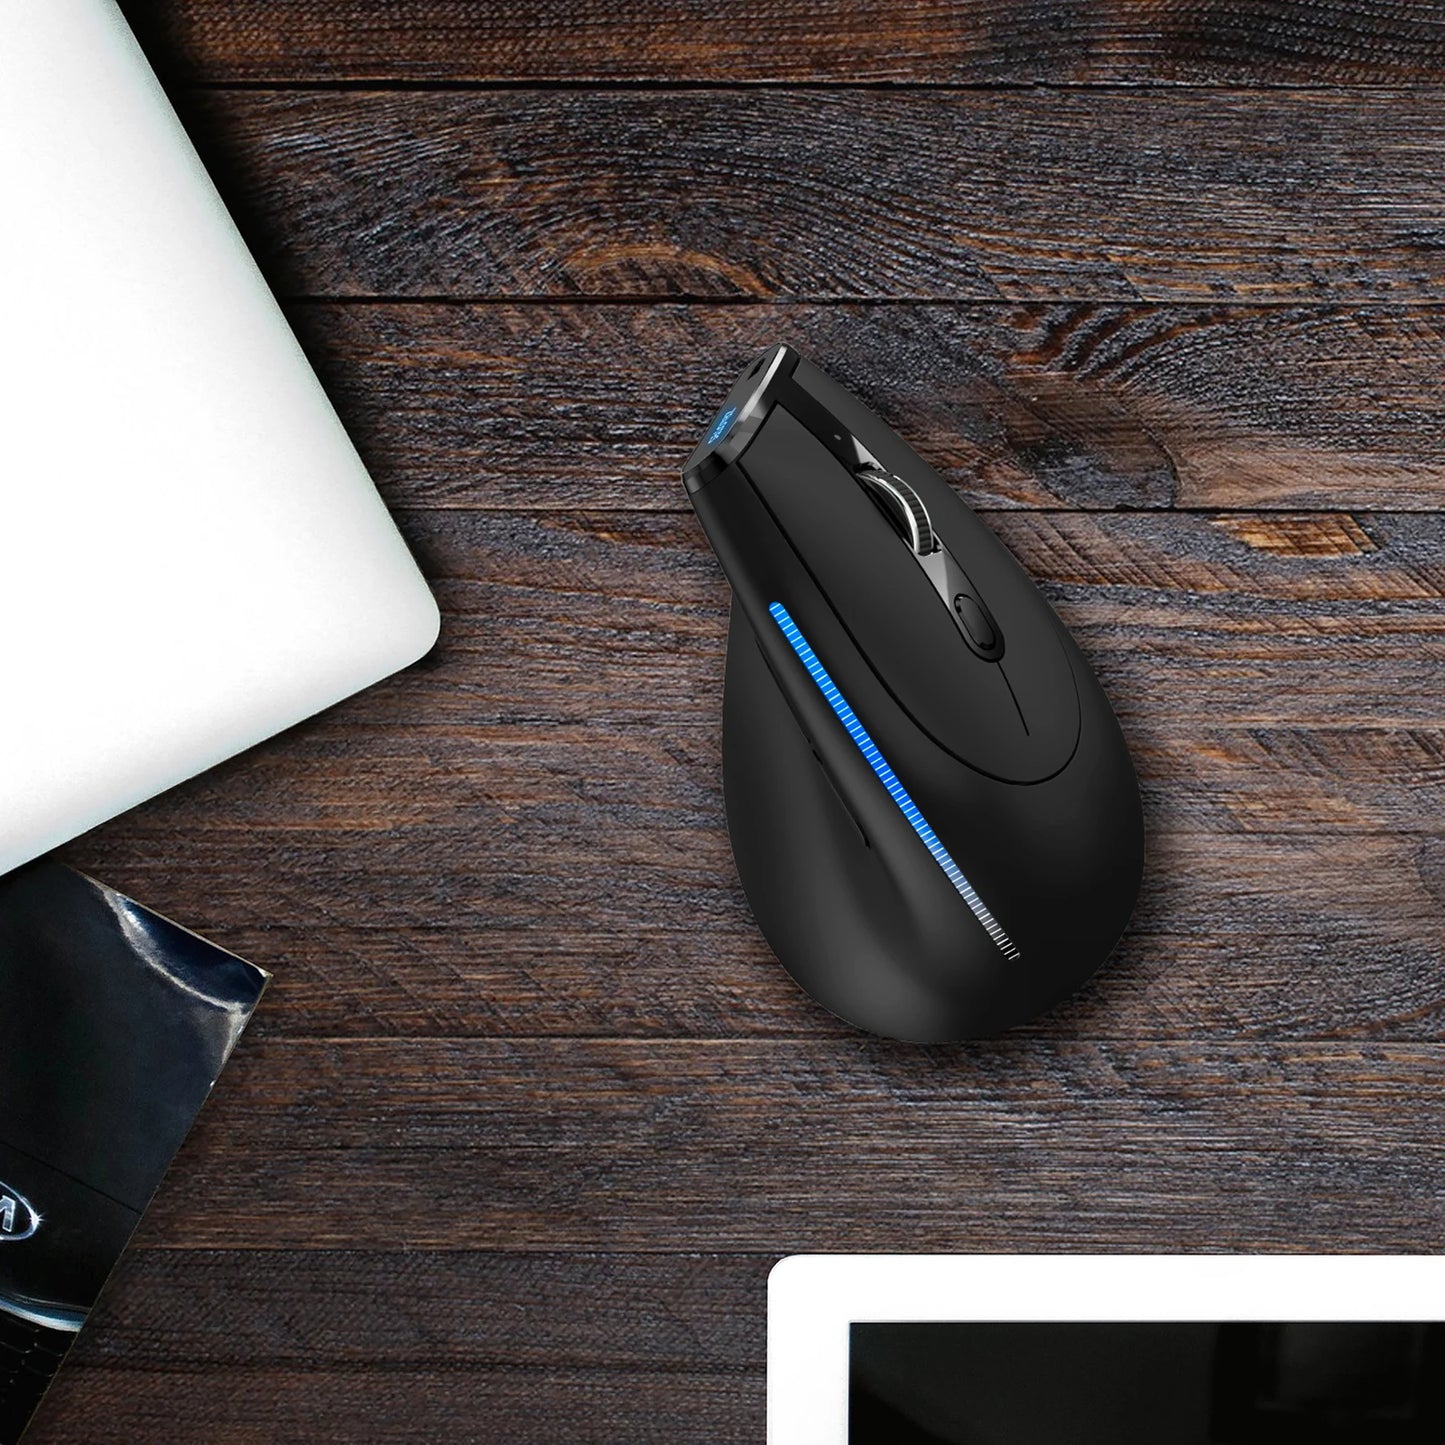 ZELOTES F-36A 2.4G Wireless Mouse Charging Blu-ray 6-button Optical mouse 3 level DPI black mouse